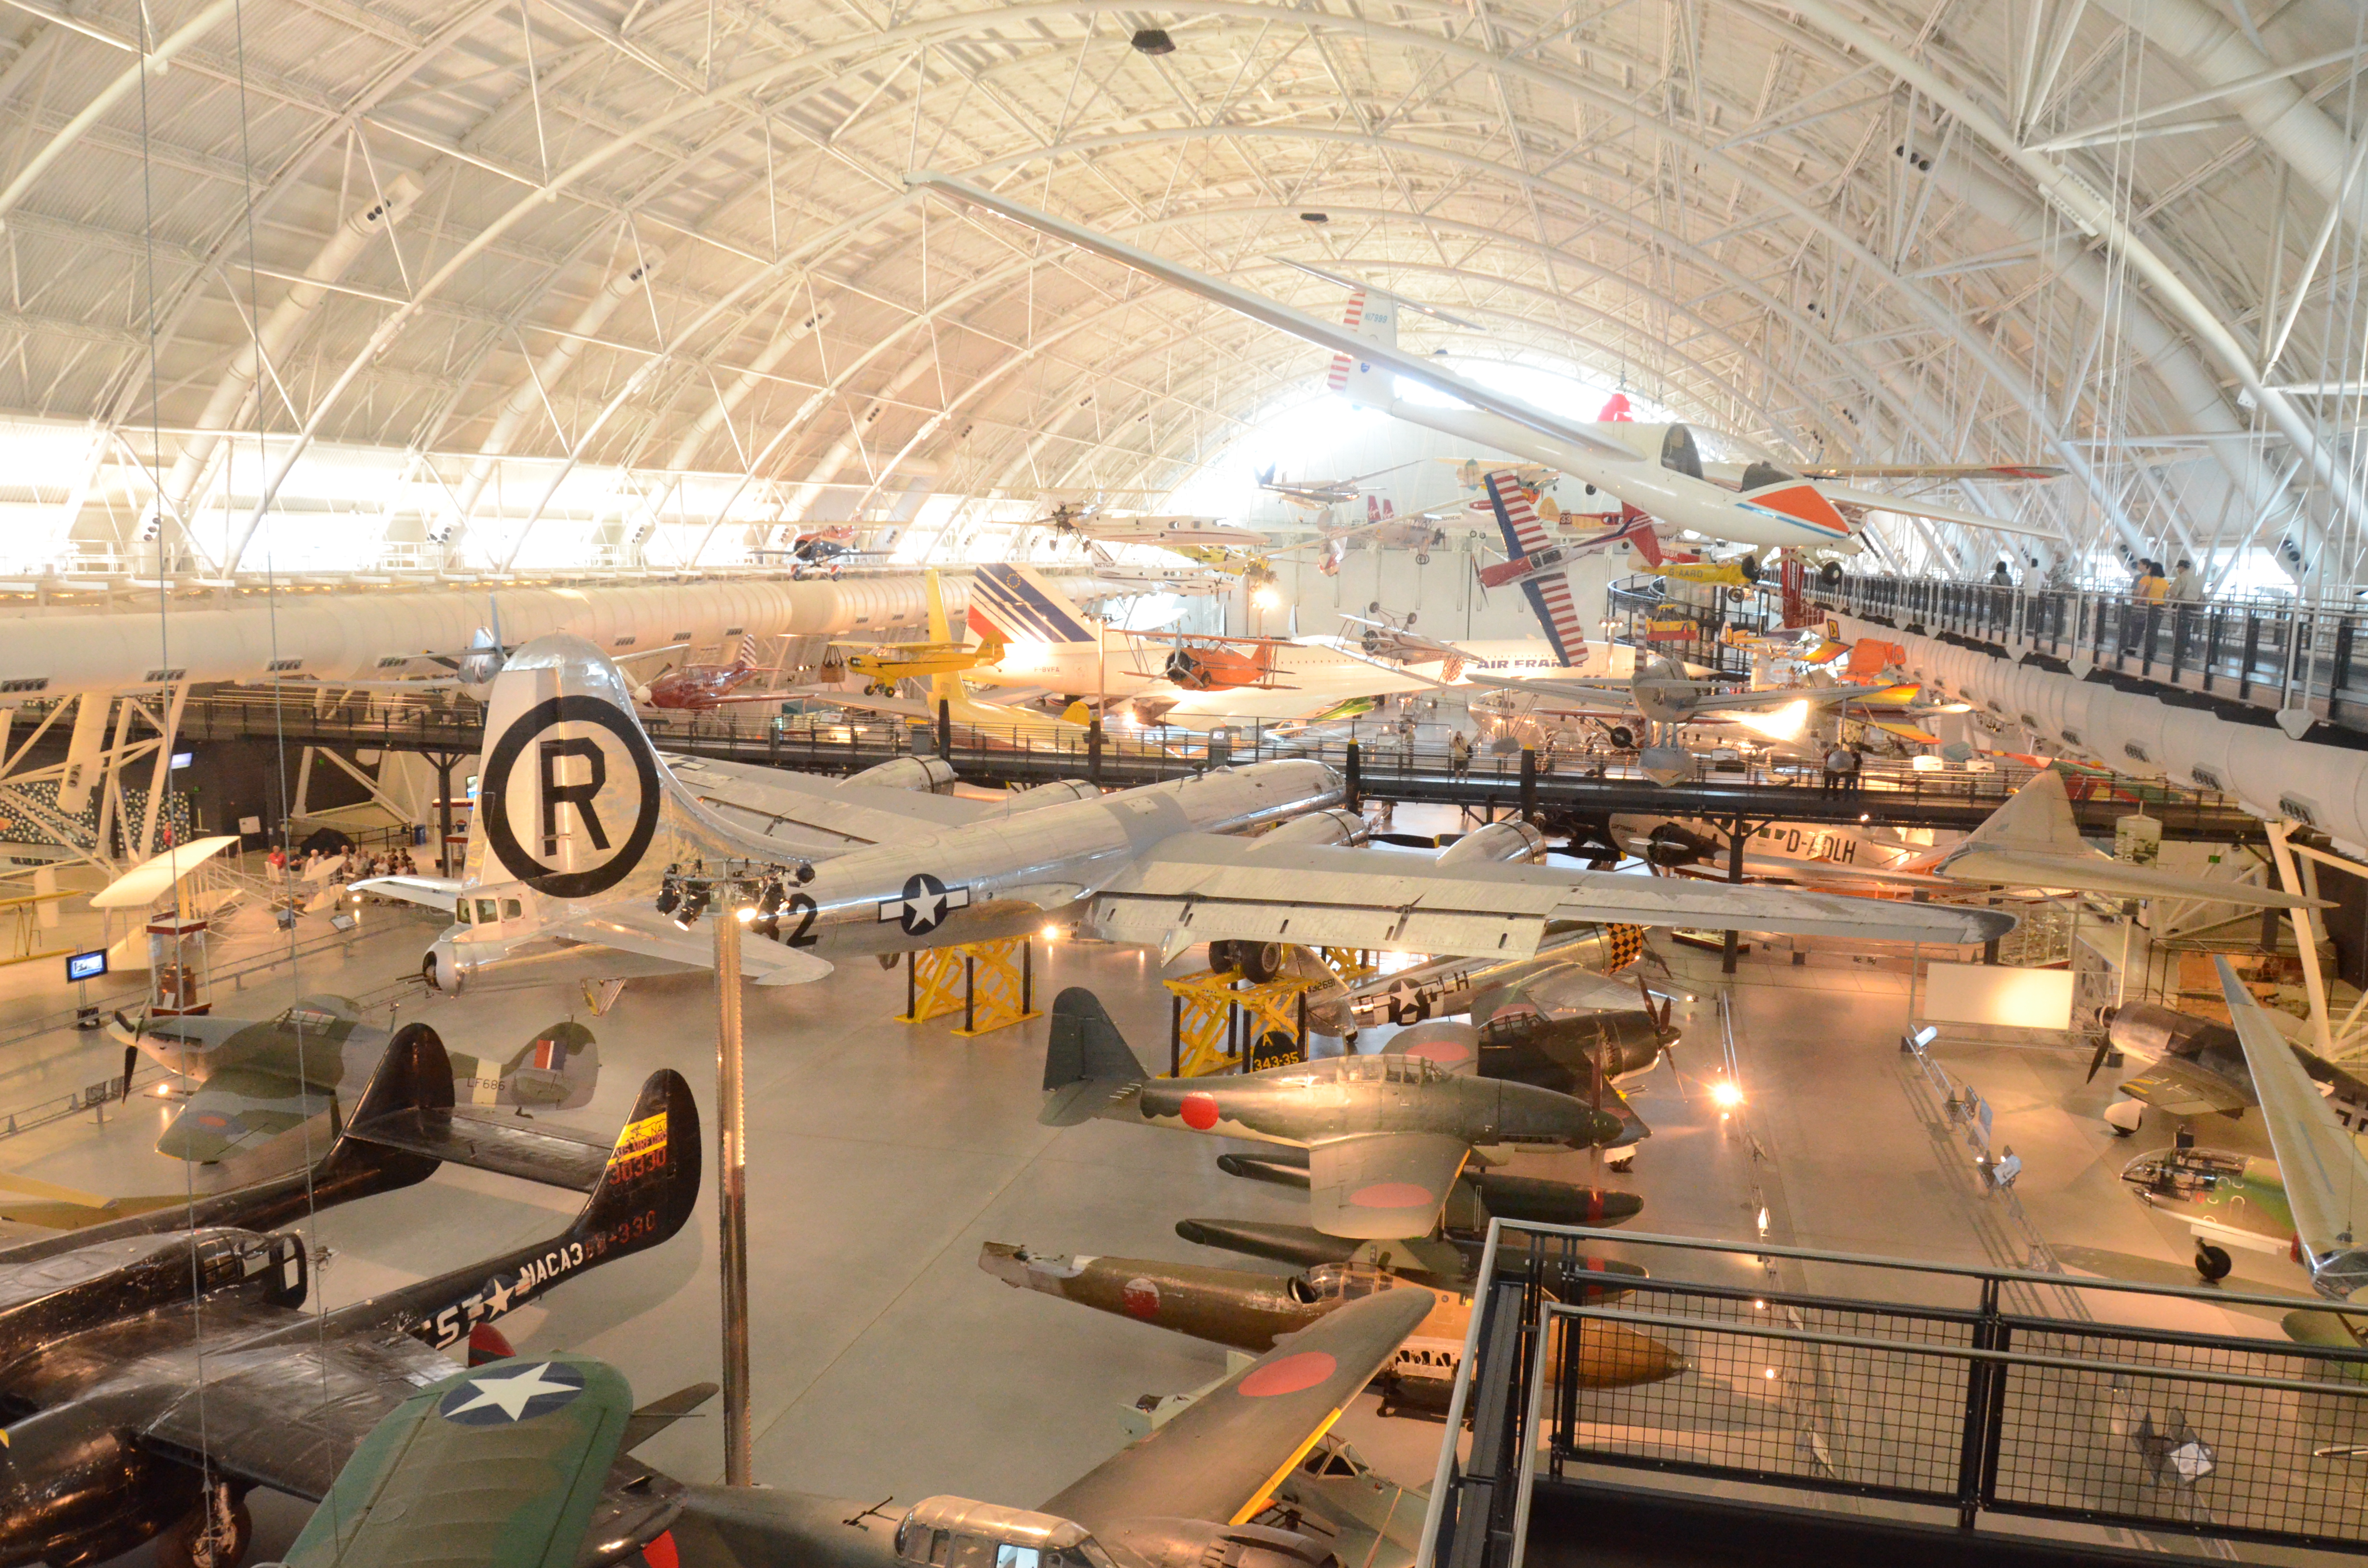 Steven F. Udvar-Hazy Center: View of south hangar, including B-29 Superfortress "Enola Gay", a glimpse of the Air France Concorde, and many others